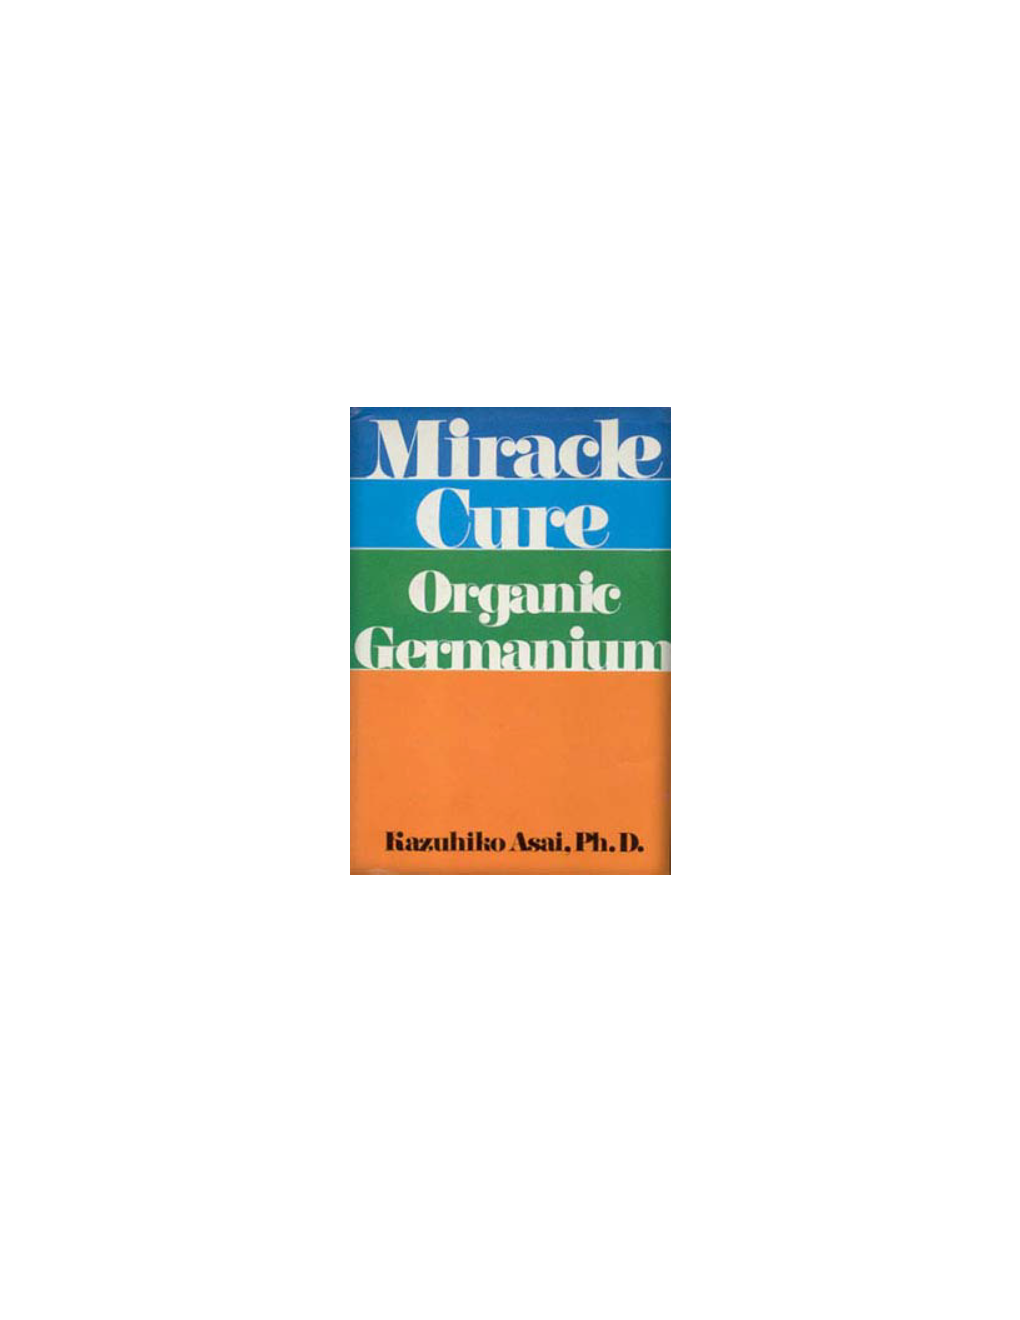 Organic Germanium. Therefore, When a Patient Comes to the Clinic He Receives a Medical Examination and the Appropriate Prescription of Germanium Is Given